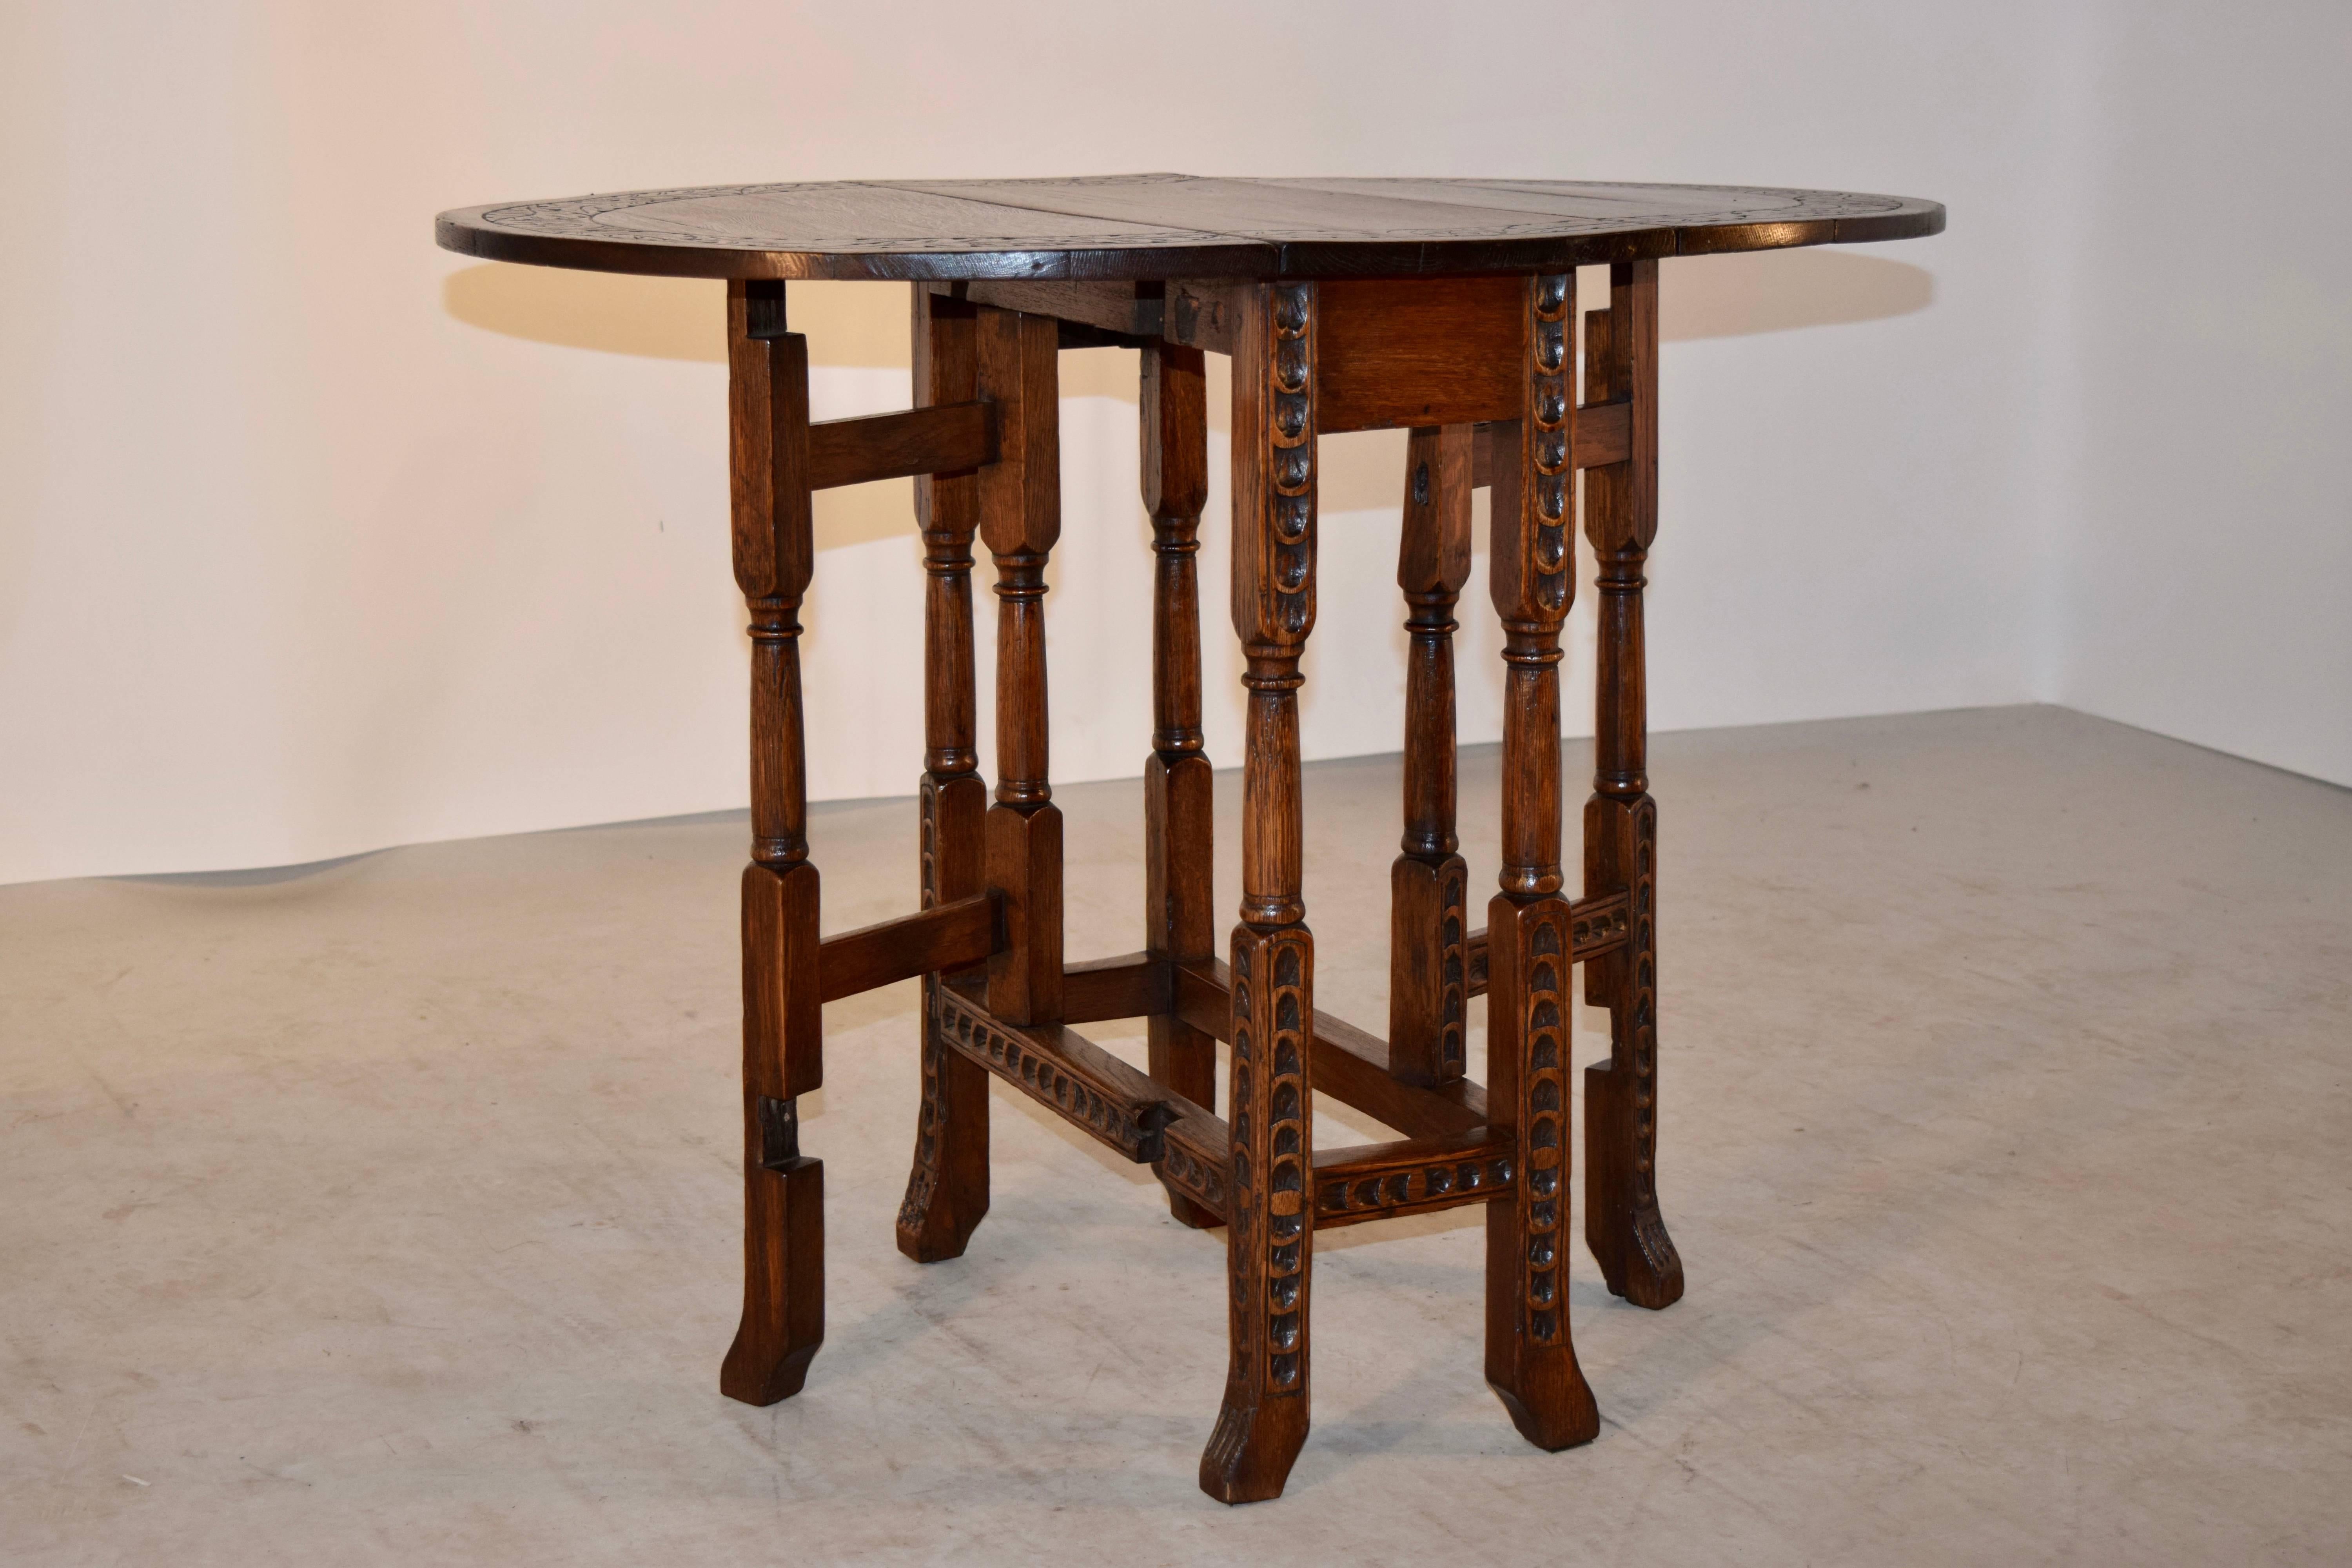 19th Century English Gate-Leg Table In Good Condition For Sale In High Point, NC